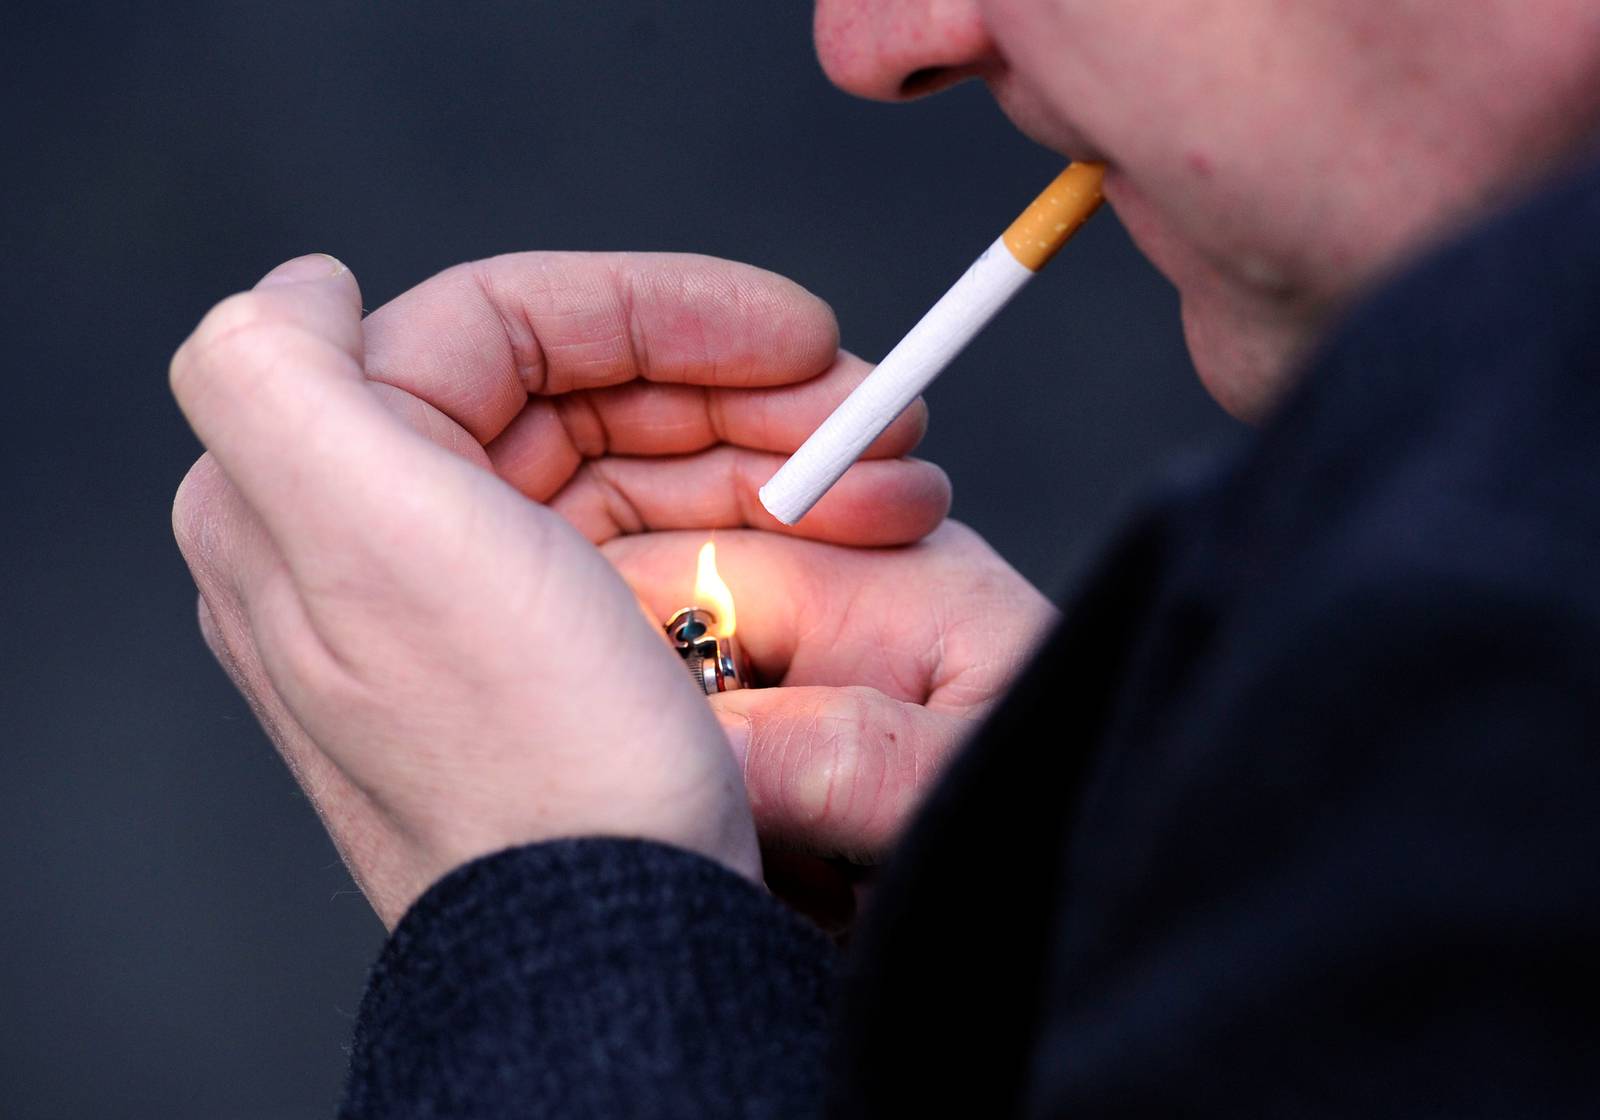 PICTURE POSED MY MODEL
File photo dated 12/03/13 of a man lighting a cigarette as poor diet and smoking are the biggest risks which may cause premature death or disability among people living in England, according to a new study led by Public Health England (PHE). PRESS ASSOCIATION Photo. Issue date: Tuesday September 15, 2015. Researchers found that 40% of the NHS's workload is due to potentially preventable factors and that the impact of an unhealthy diet accounted for 10.8% of the disease burden while tobacco accounted for 10.7%. See PA story HEALTH Expectancy. Photo credit should read: Jonathan Brady/PA Wire